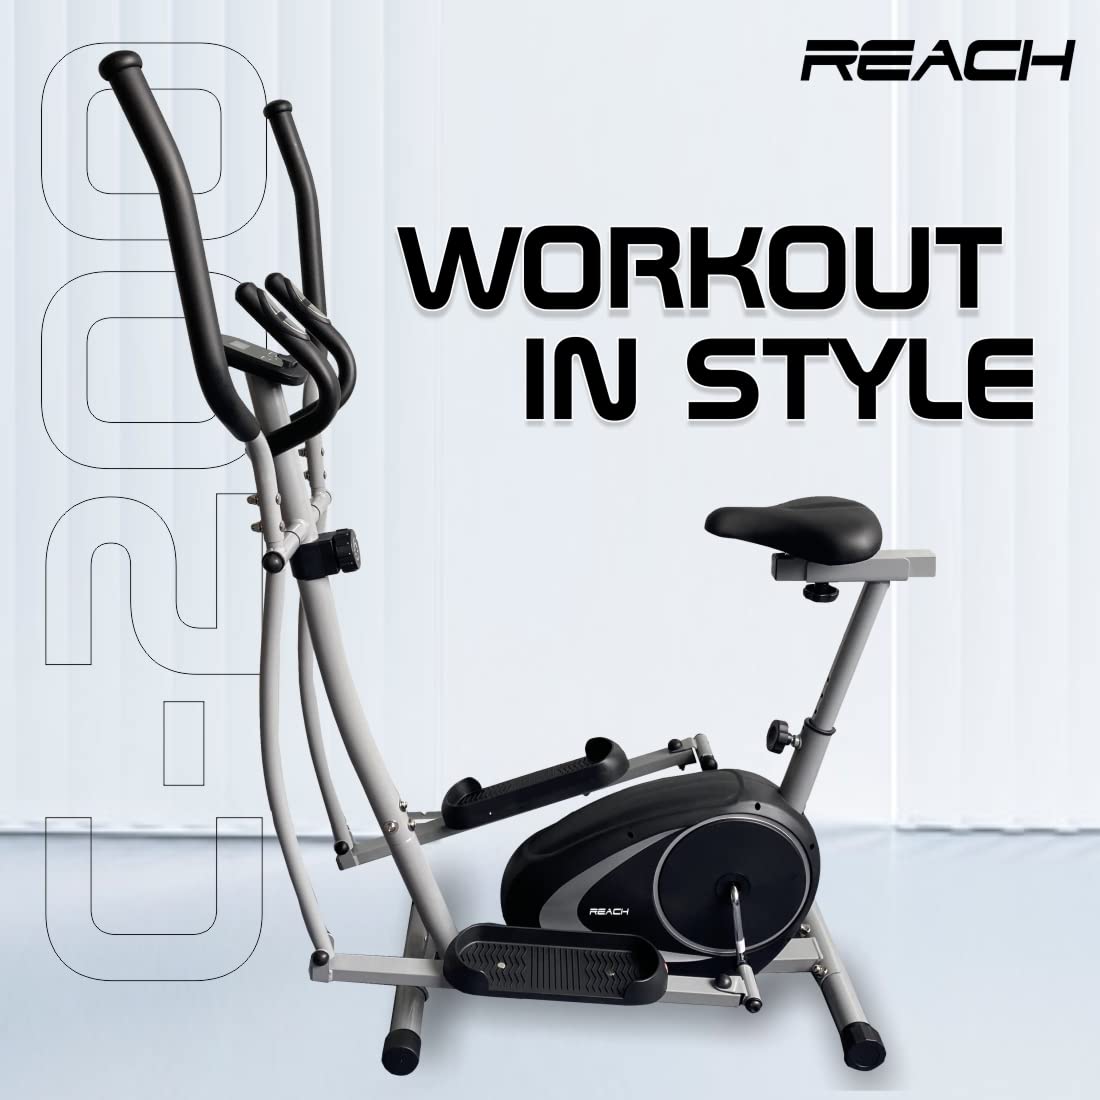 Reach C-200 Elliptical Cross Trainer with 4 Kg Flywheel for Home Gym  Exercise Cycle with 8 Level Adjustable Resistance LCD Display  Health Tracker  Fitness  Cardio Training  12 Months Warranty